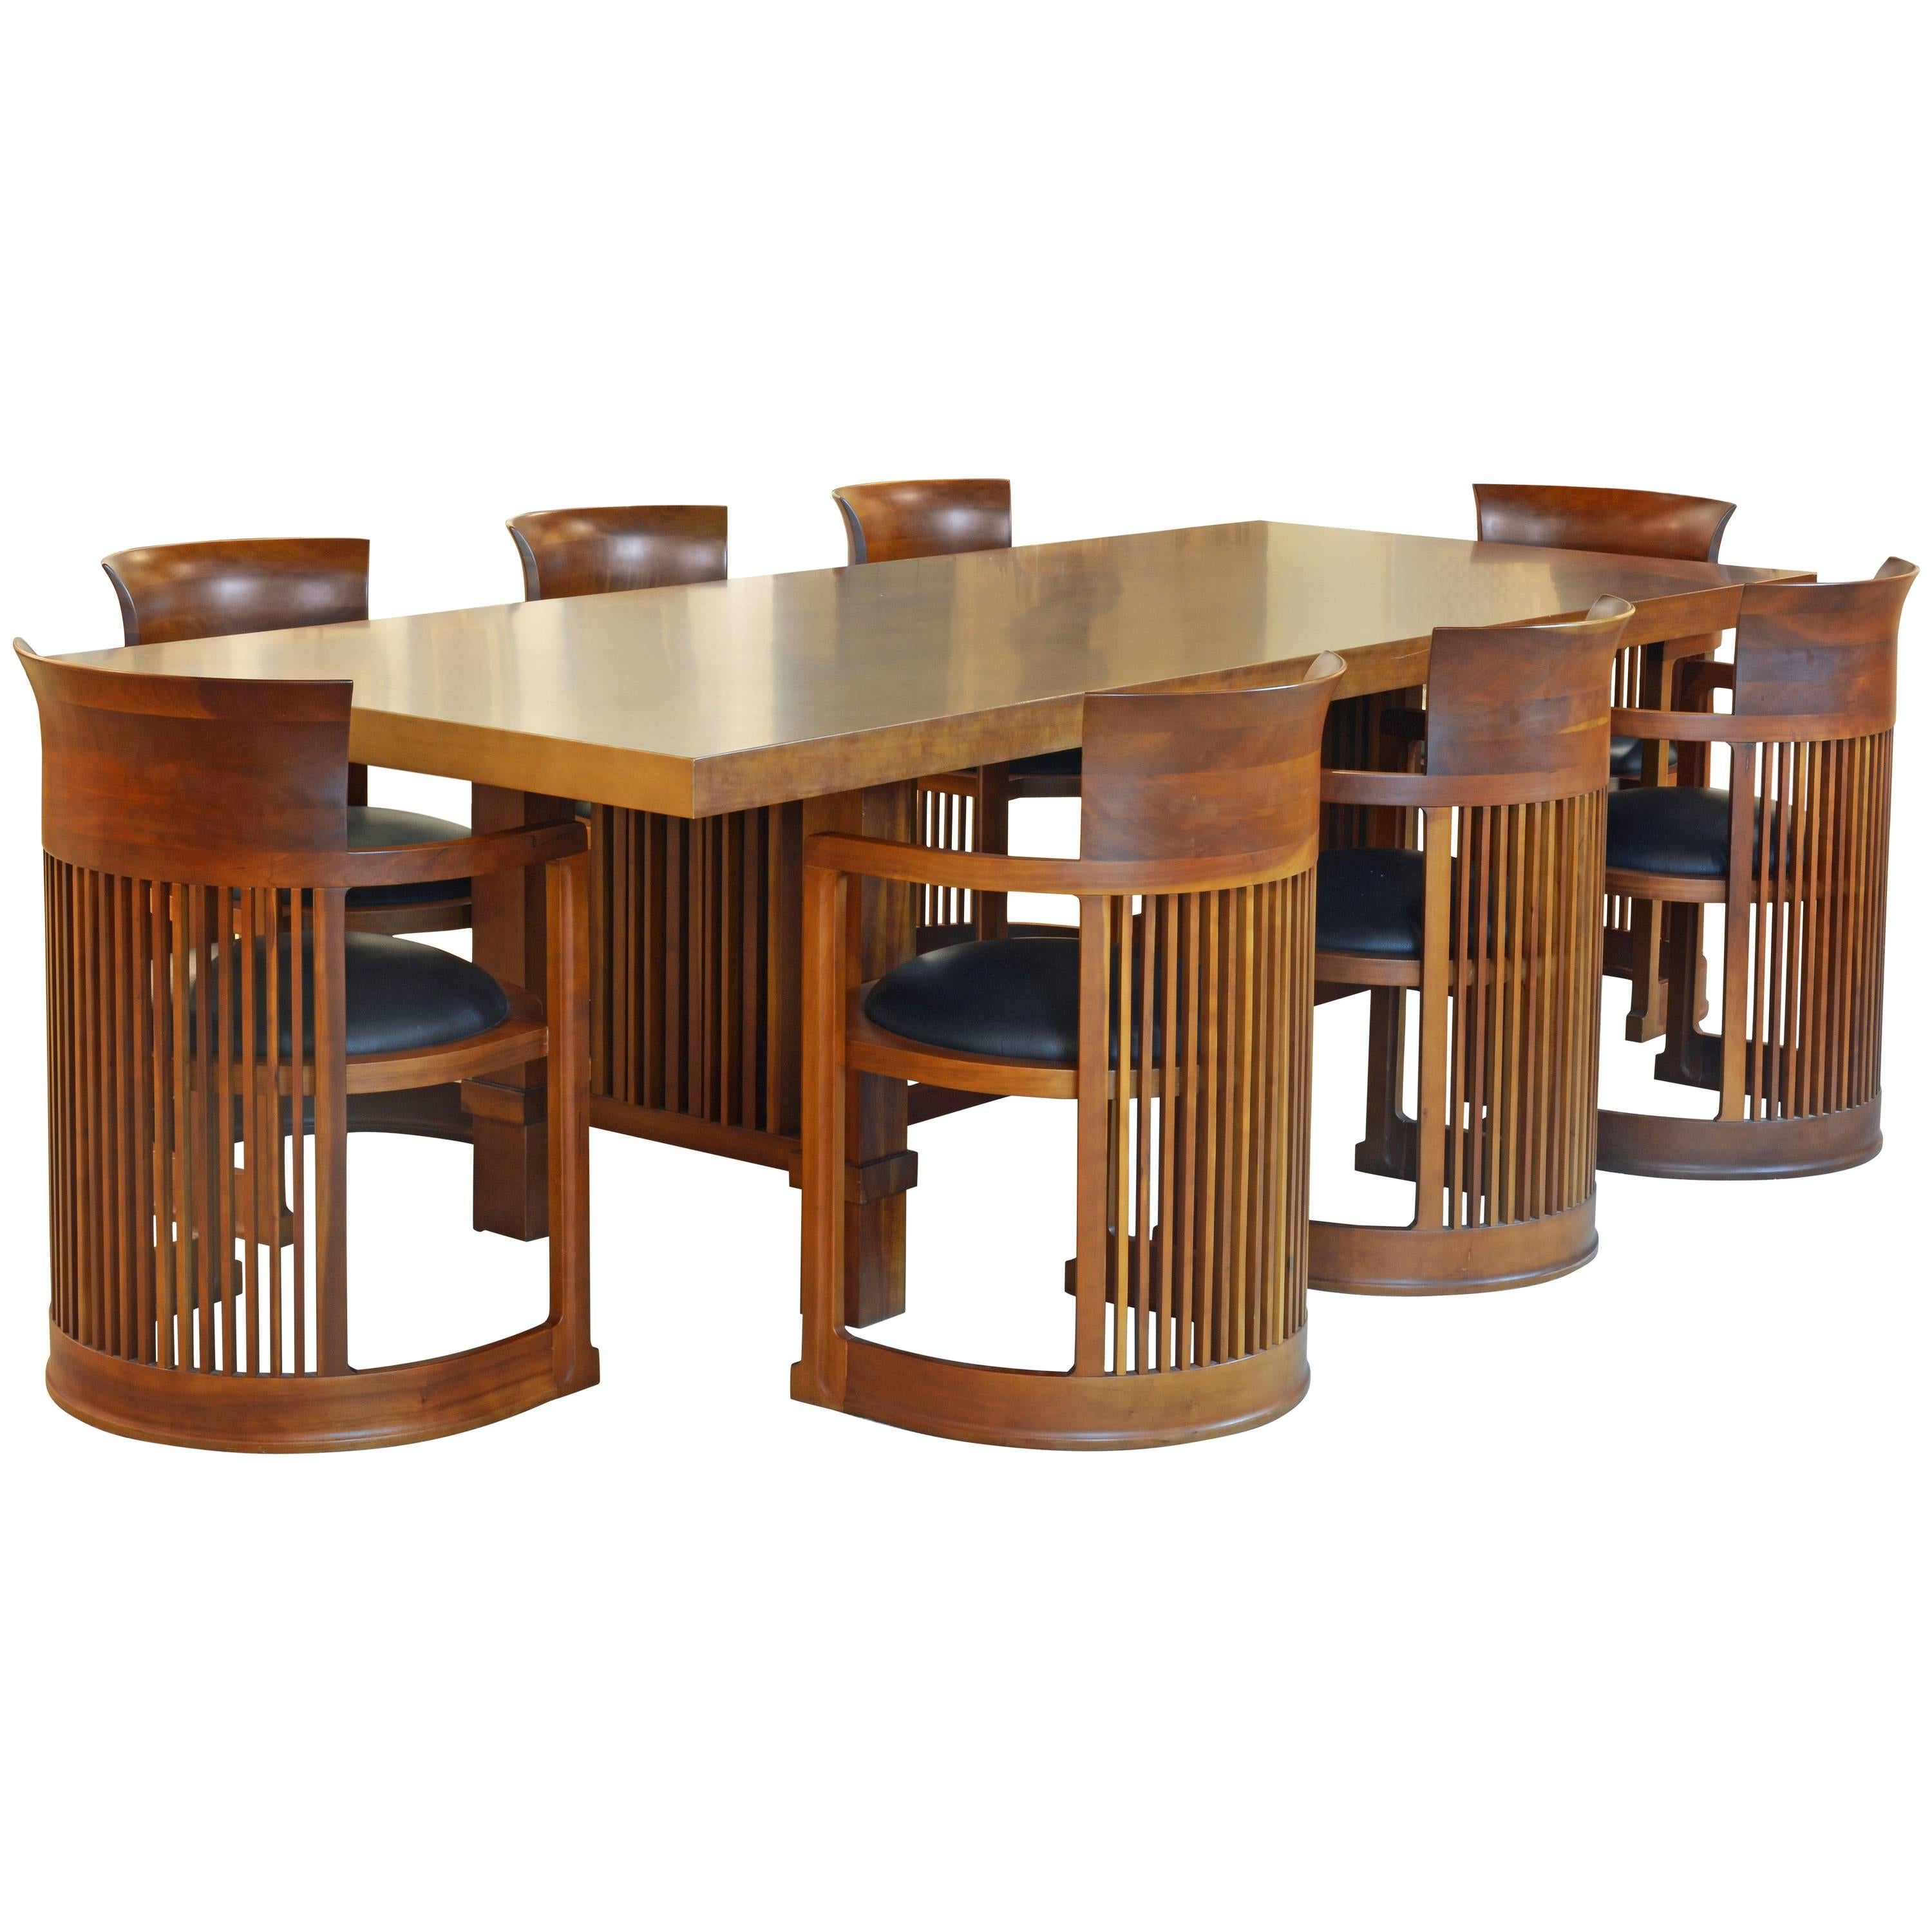 Frank Lloyd Wright Inspired Cherrywood Dining Table & Eight Chairs with Leather